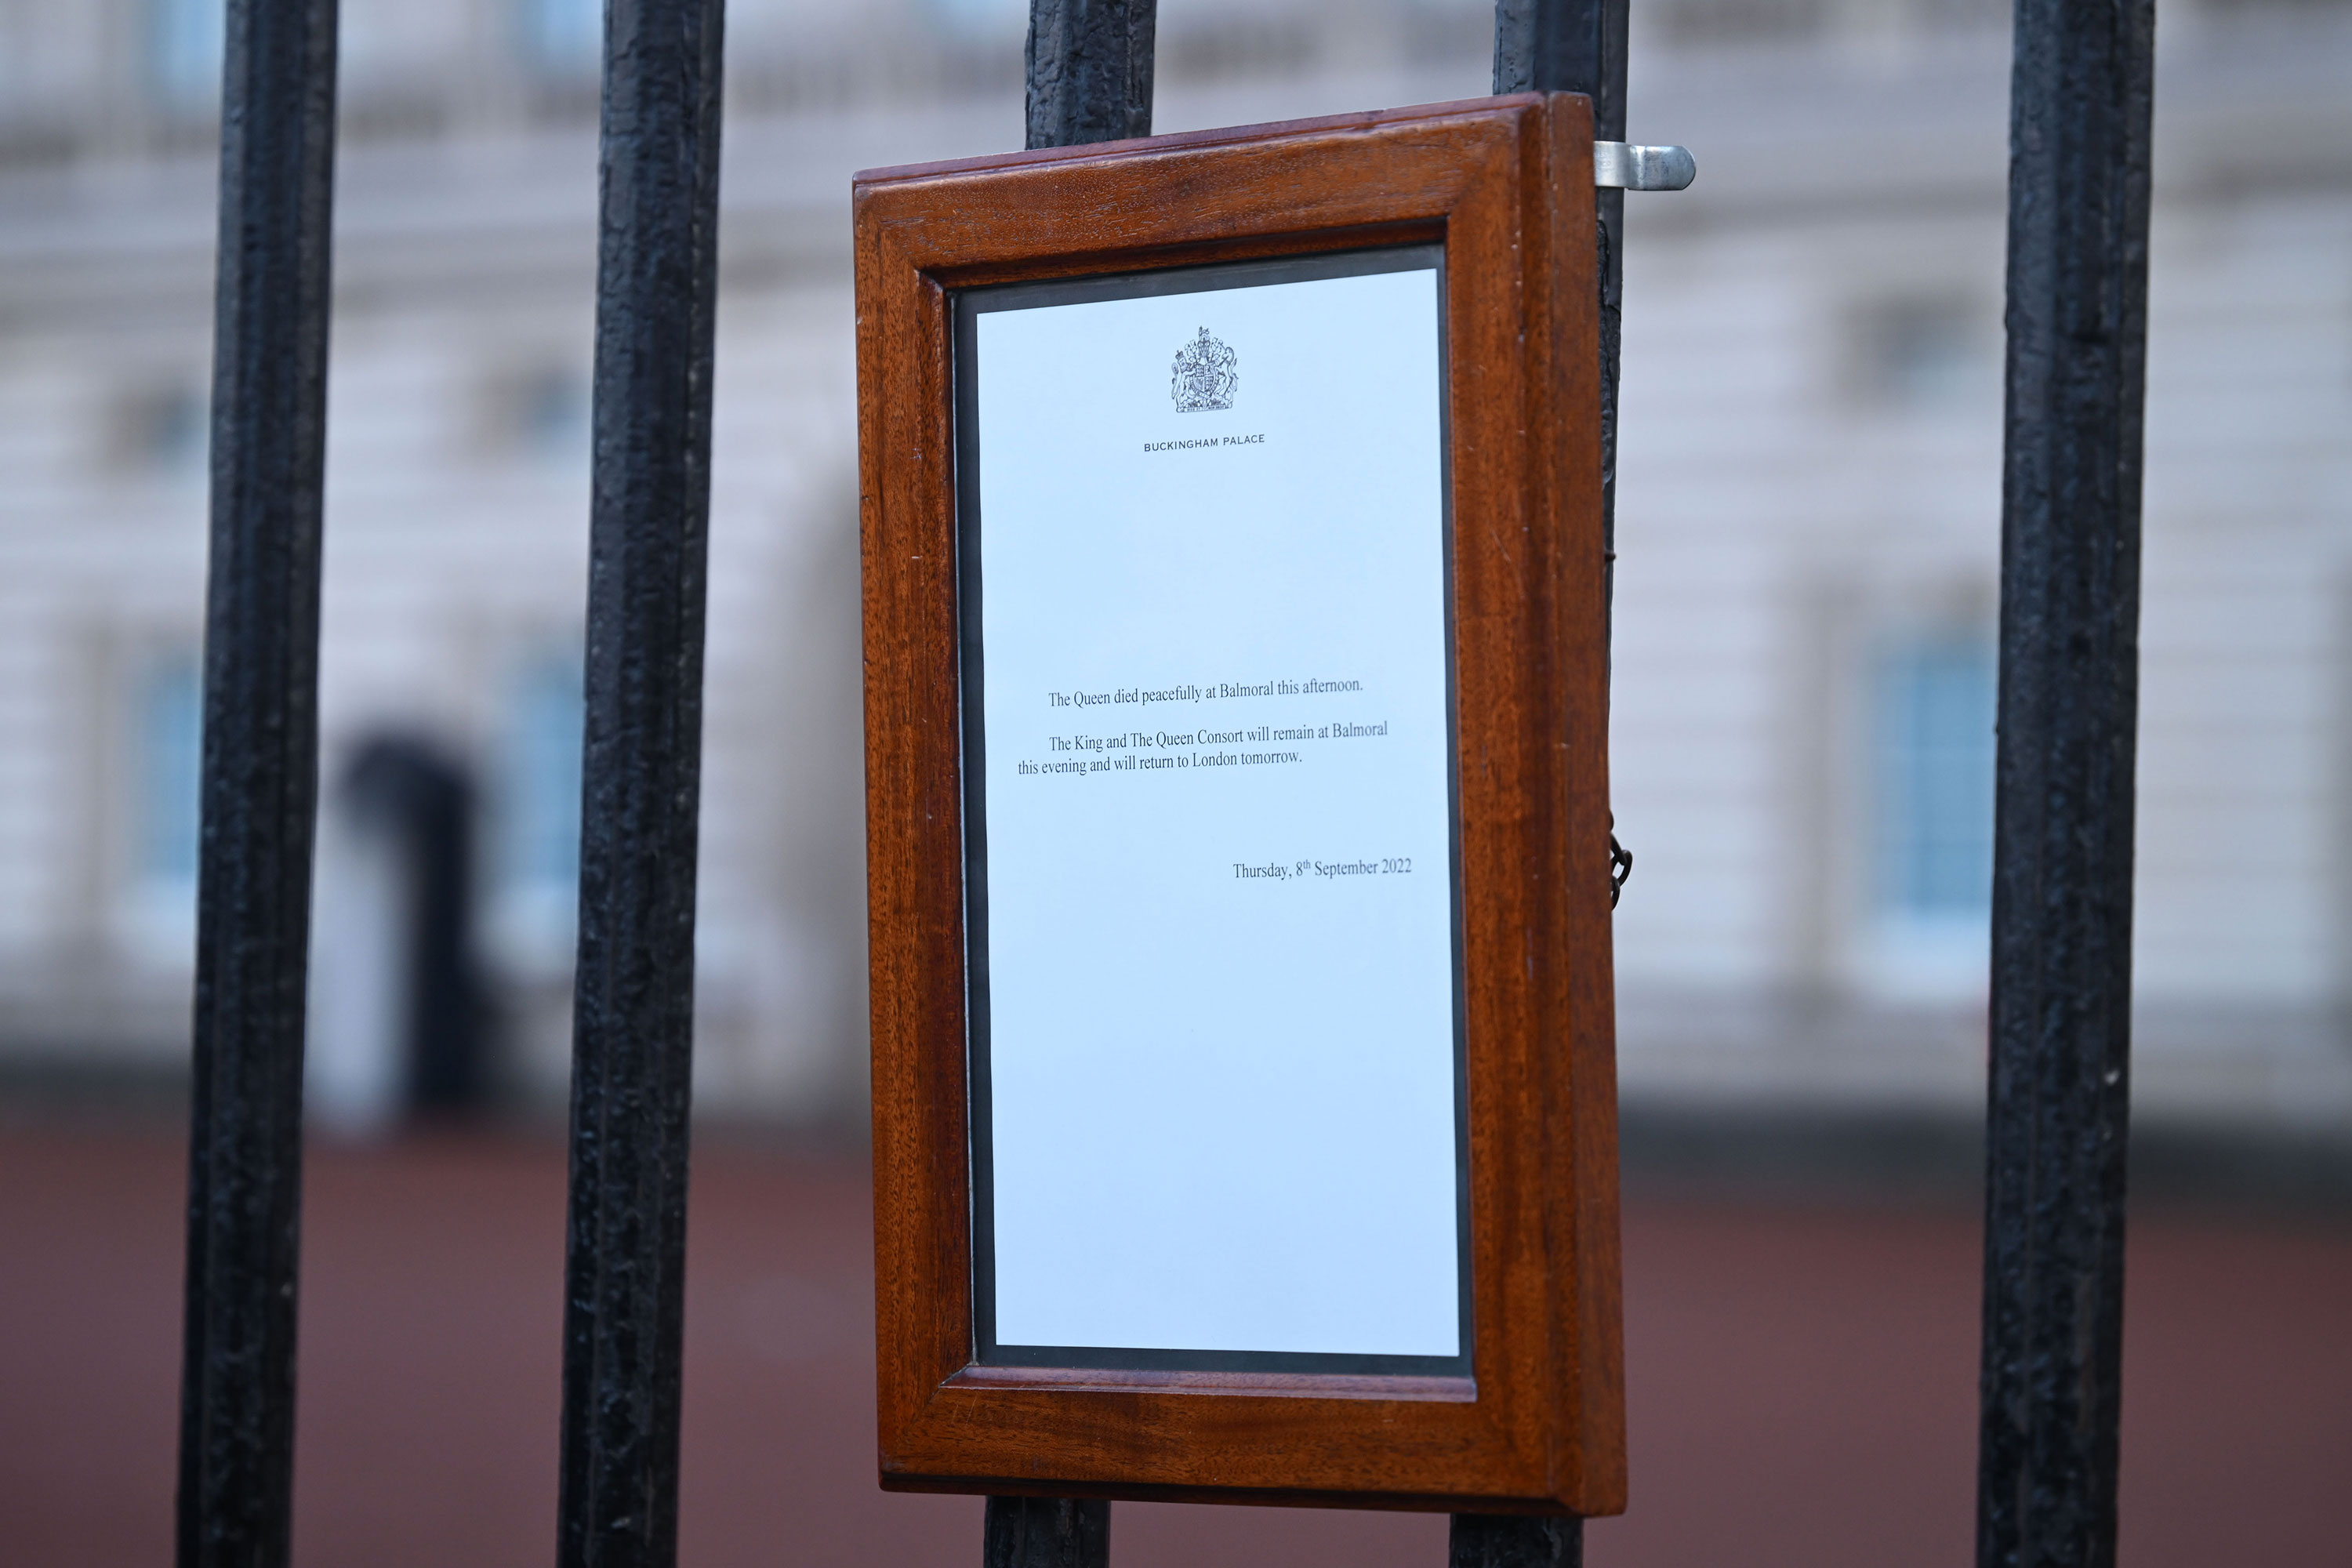 An official statement confirming the death of Queen Elizabeth II is displayed in front of Buckingham Palace on Thursday.